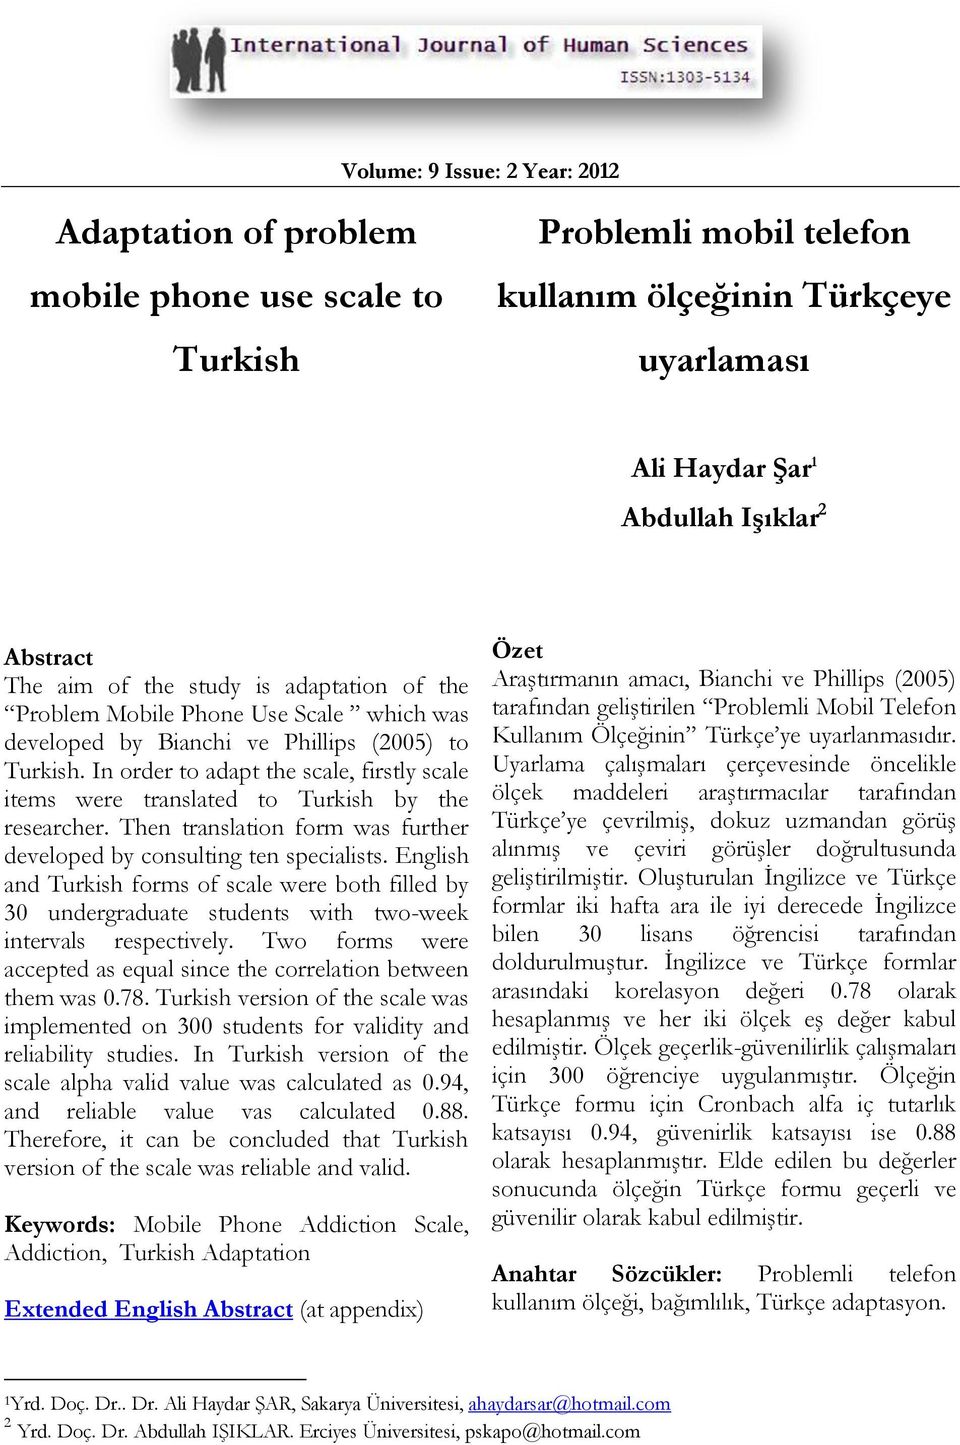 In order to adapt the scale, firstly scale items were translated to Turkish by the researcher. Then translation form was further developed by consulting ten specialists.